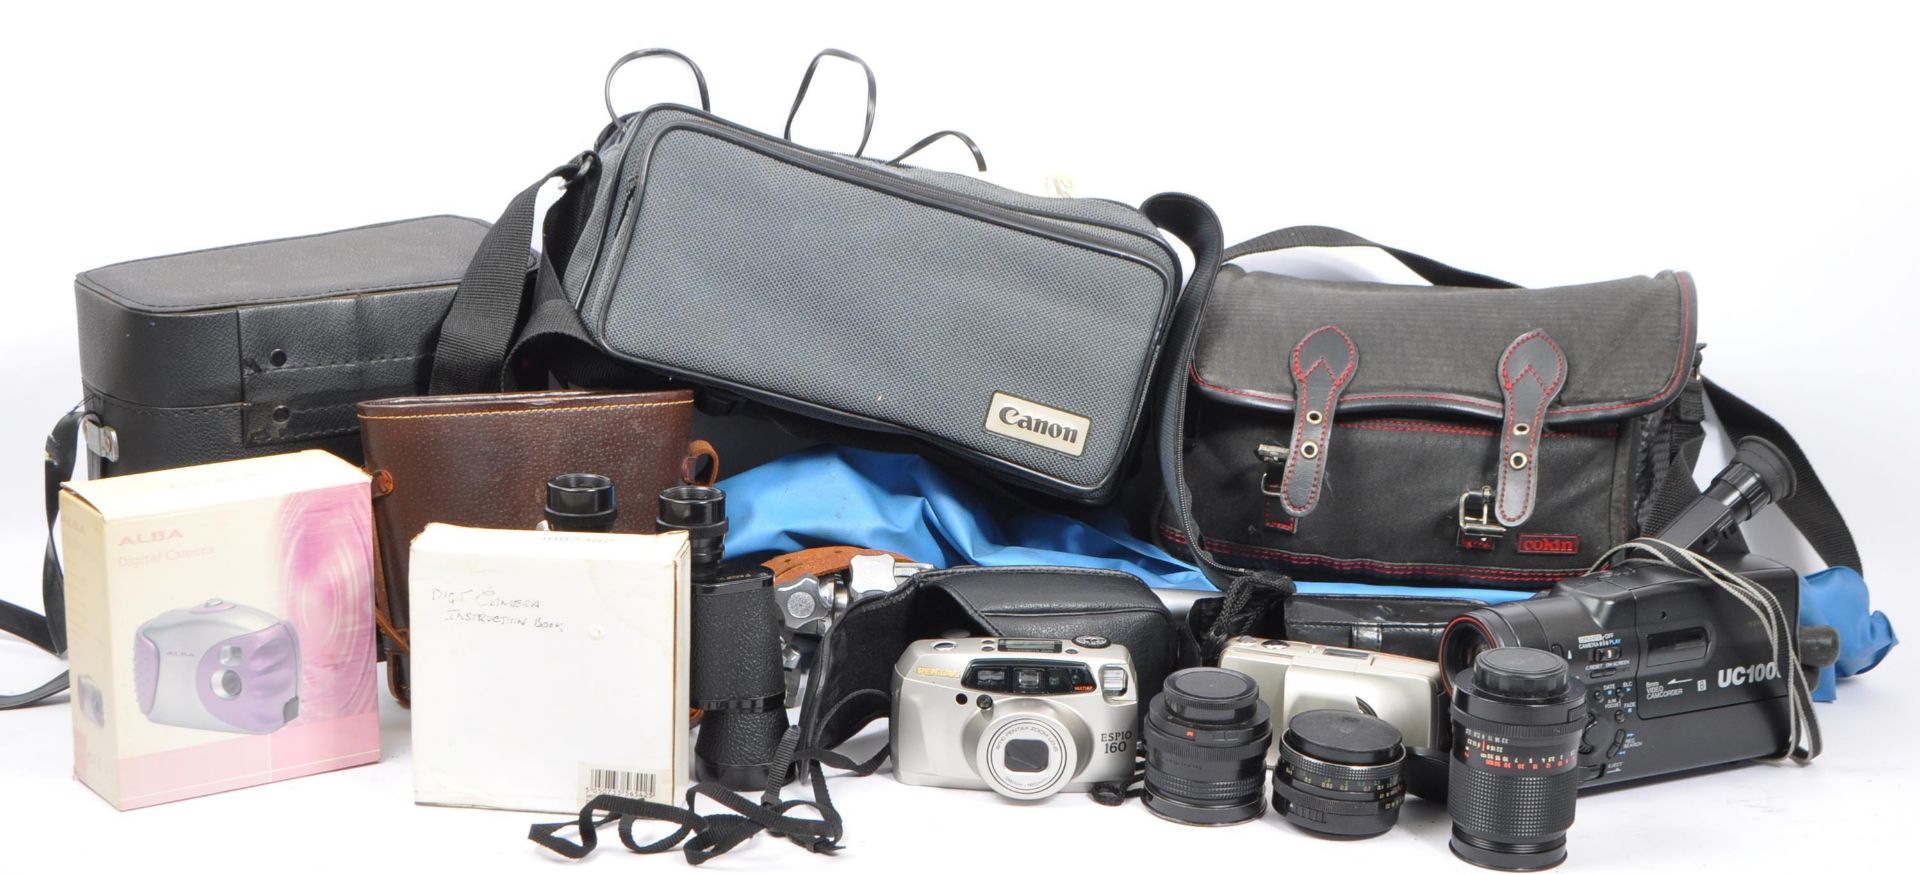 COLLECTION OF VINTAGE PHOTOGRAPHY CAMERA LENSES ACCESSORIES